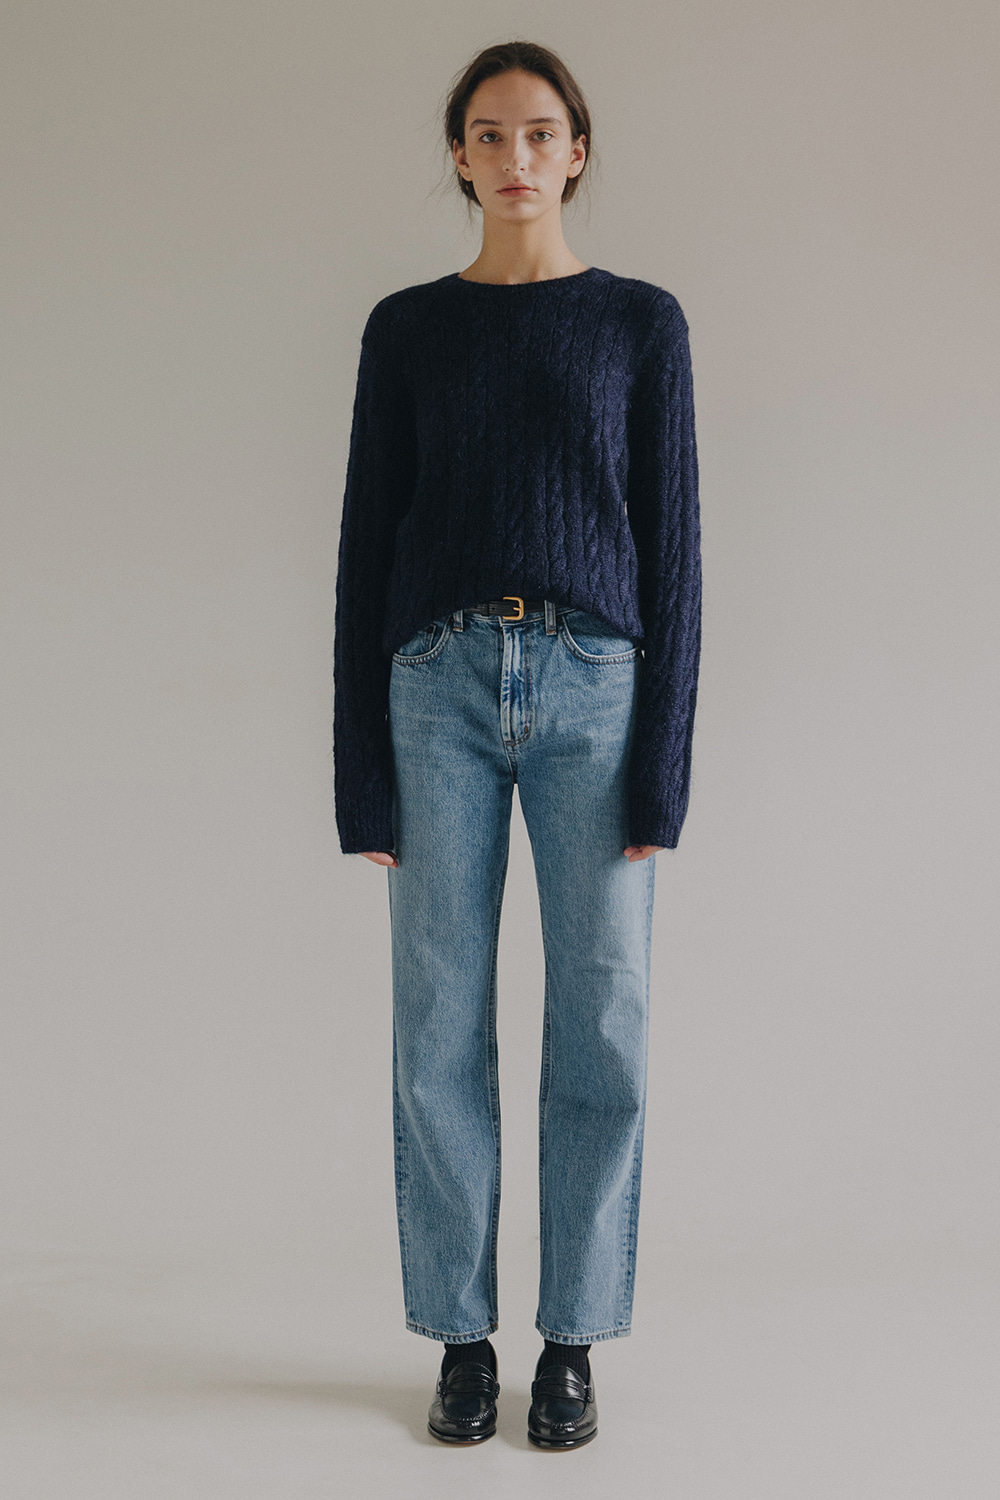 Mohair Cable Knit (Navy)